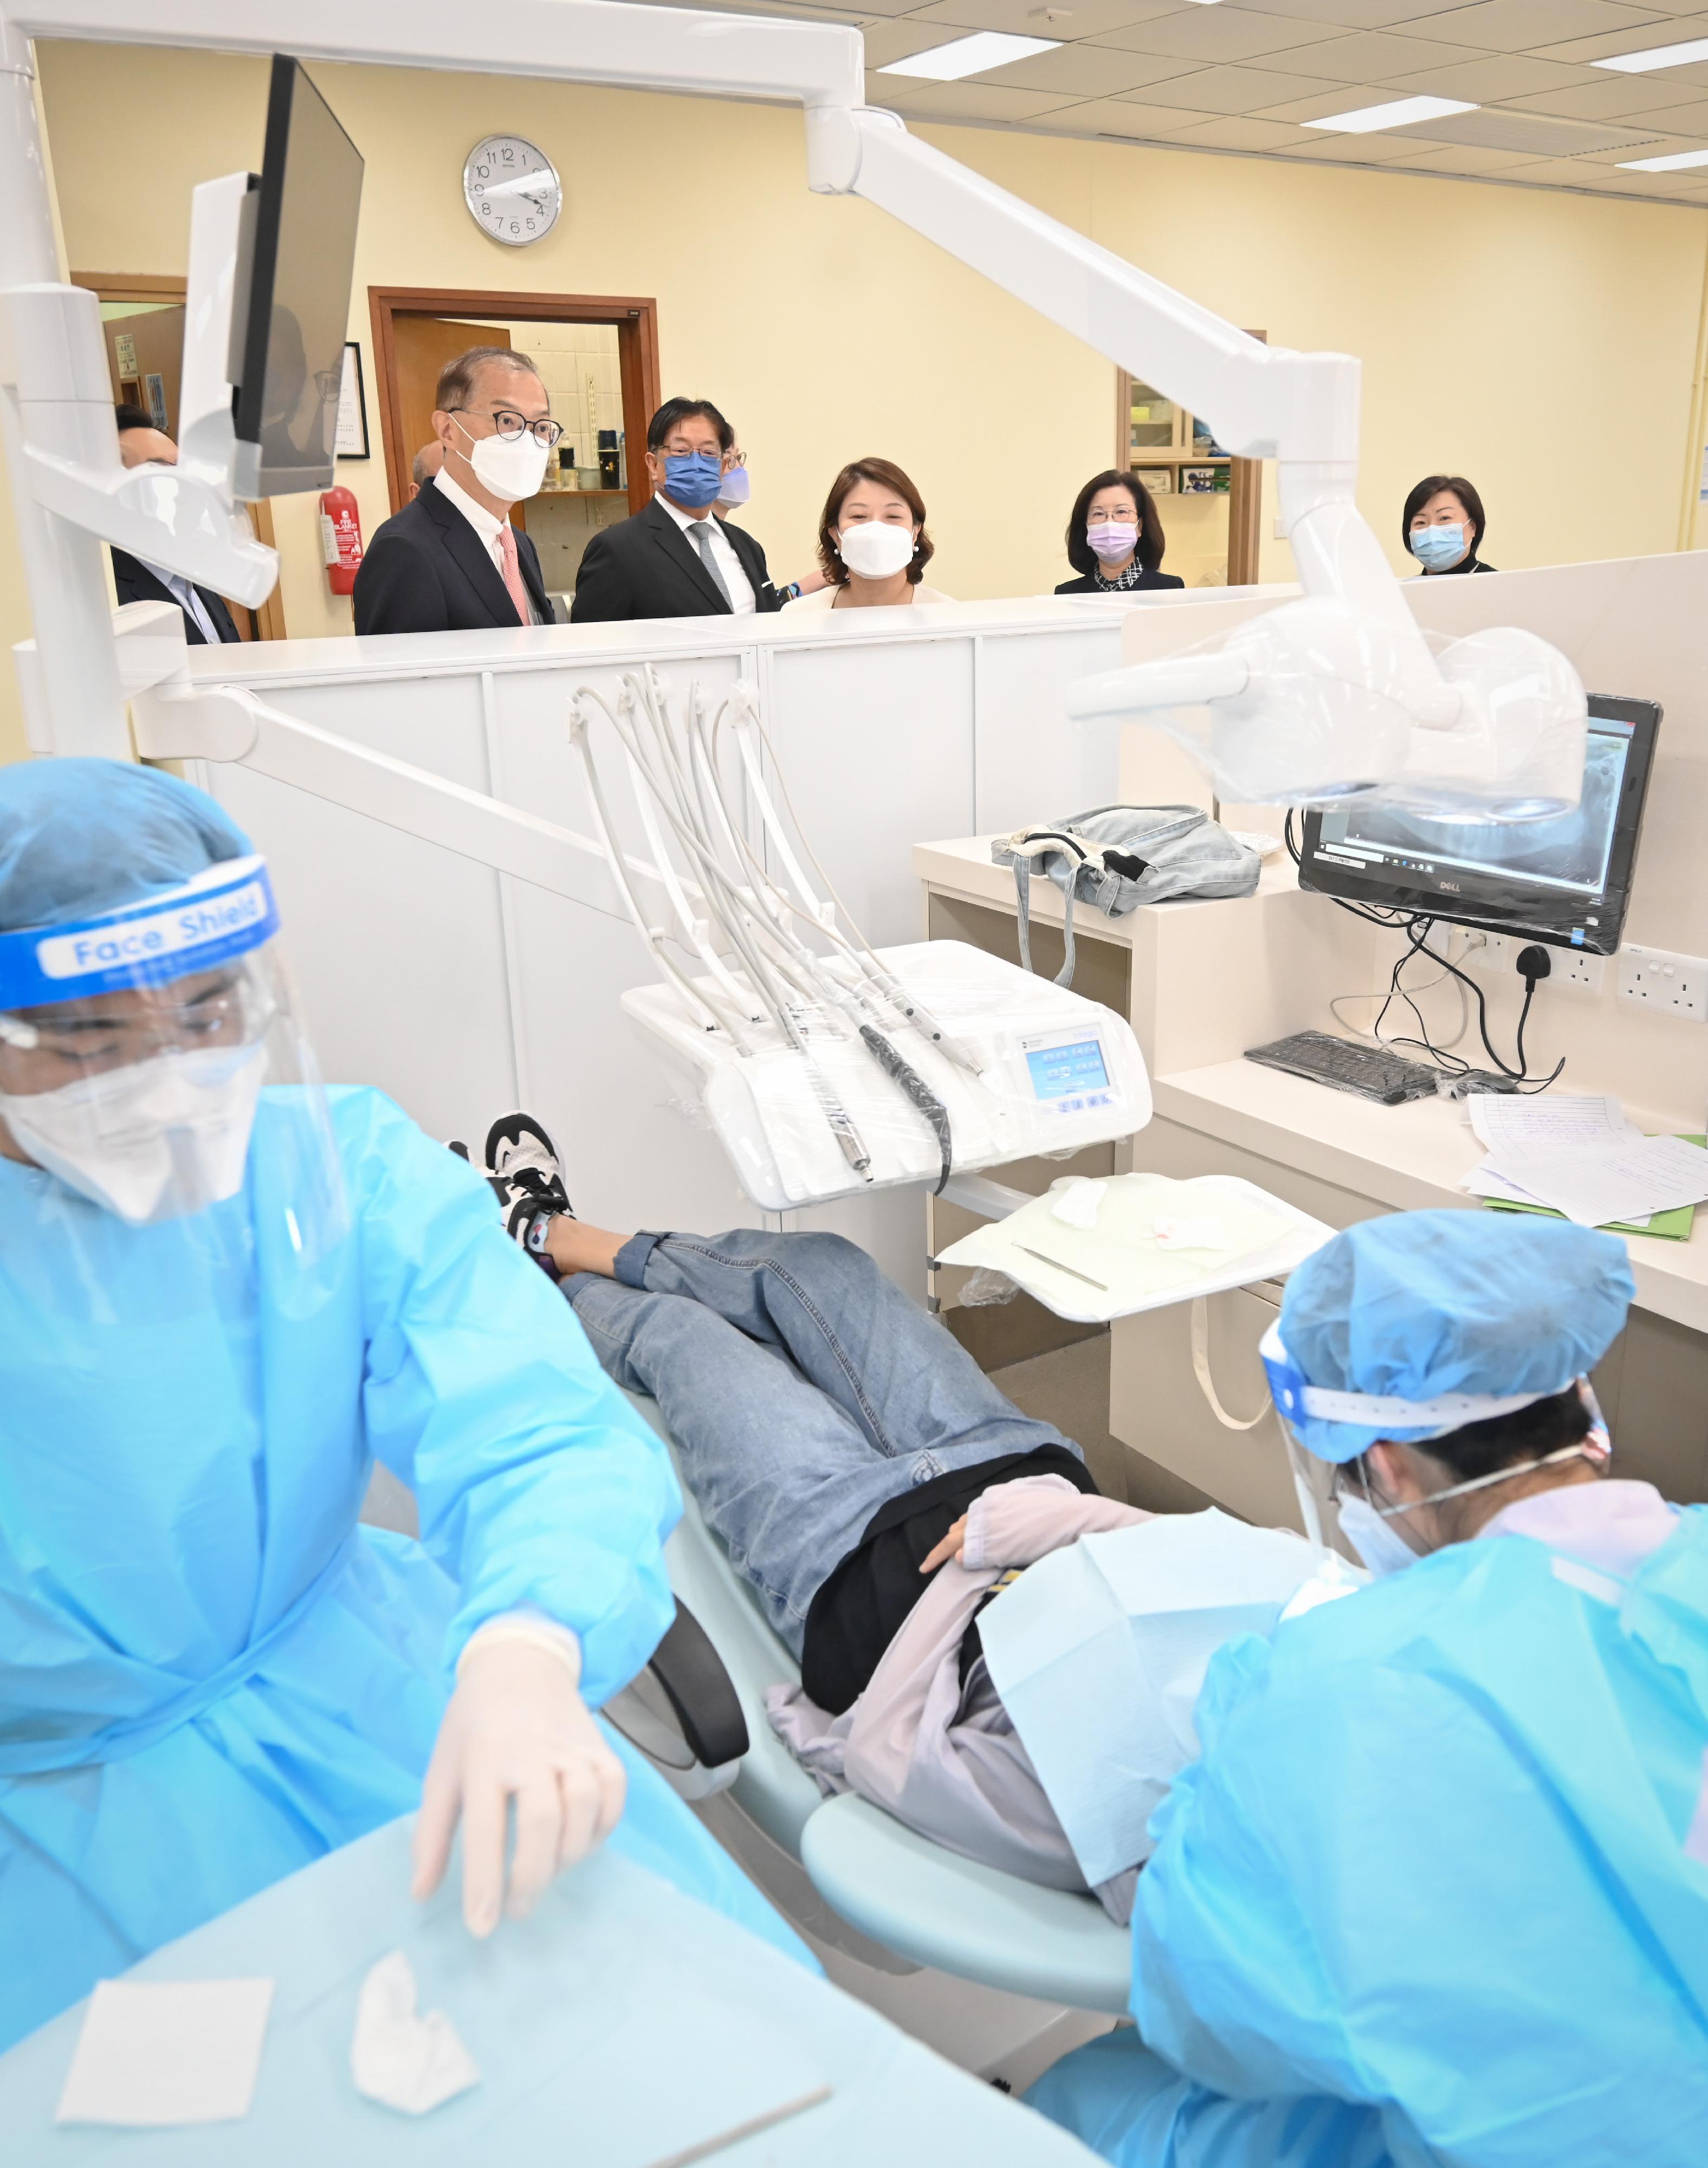 The Secretary for Health, Professor Lo Chung-mau (back row, first left), learned about the treatment service provided at the comprehensive dental clinic of the Prince Philip Dental Hospital (PPDH) today (May 9). Next to him are the Under Secretary for Health, Dr Libby Lee (back row, centre); the Chairman of the Board of Governors of PPDH, Mr Huen Wong (back row, second left); and the Director of the PPDH, Professor Cynthia Yiu (back row, second right).